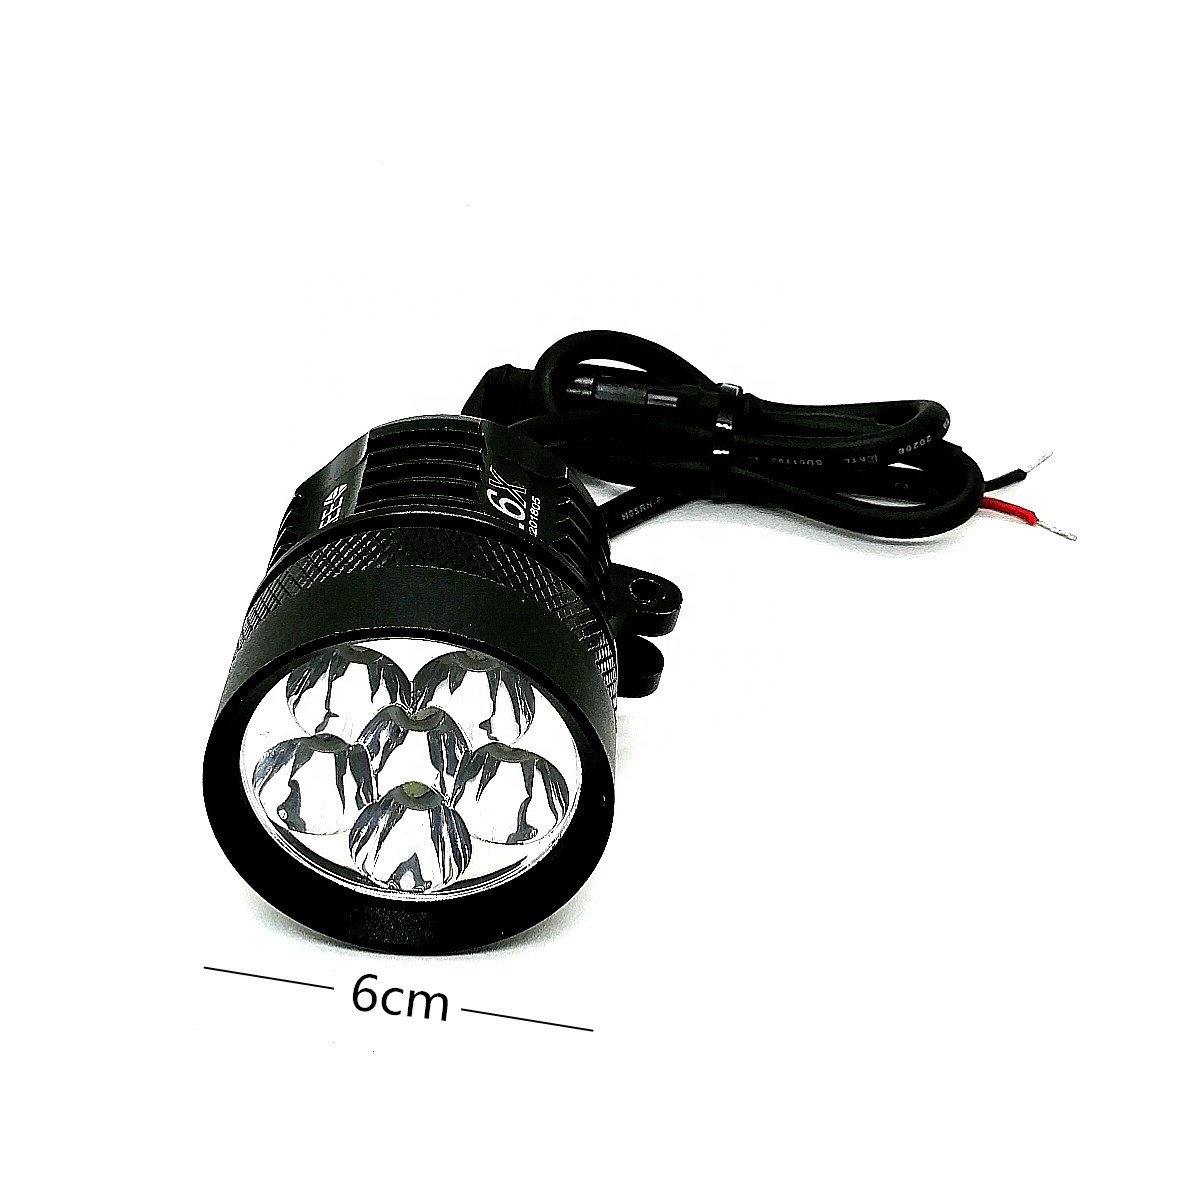 L6X HJG Fog - 40 Watts (6 Months Guarantee) - Premium Auxiliary Lights from Sparewick - Just Rs. 2700! Shop now at Sparewick